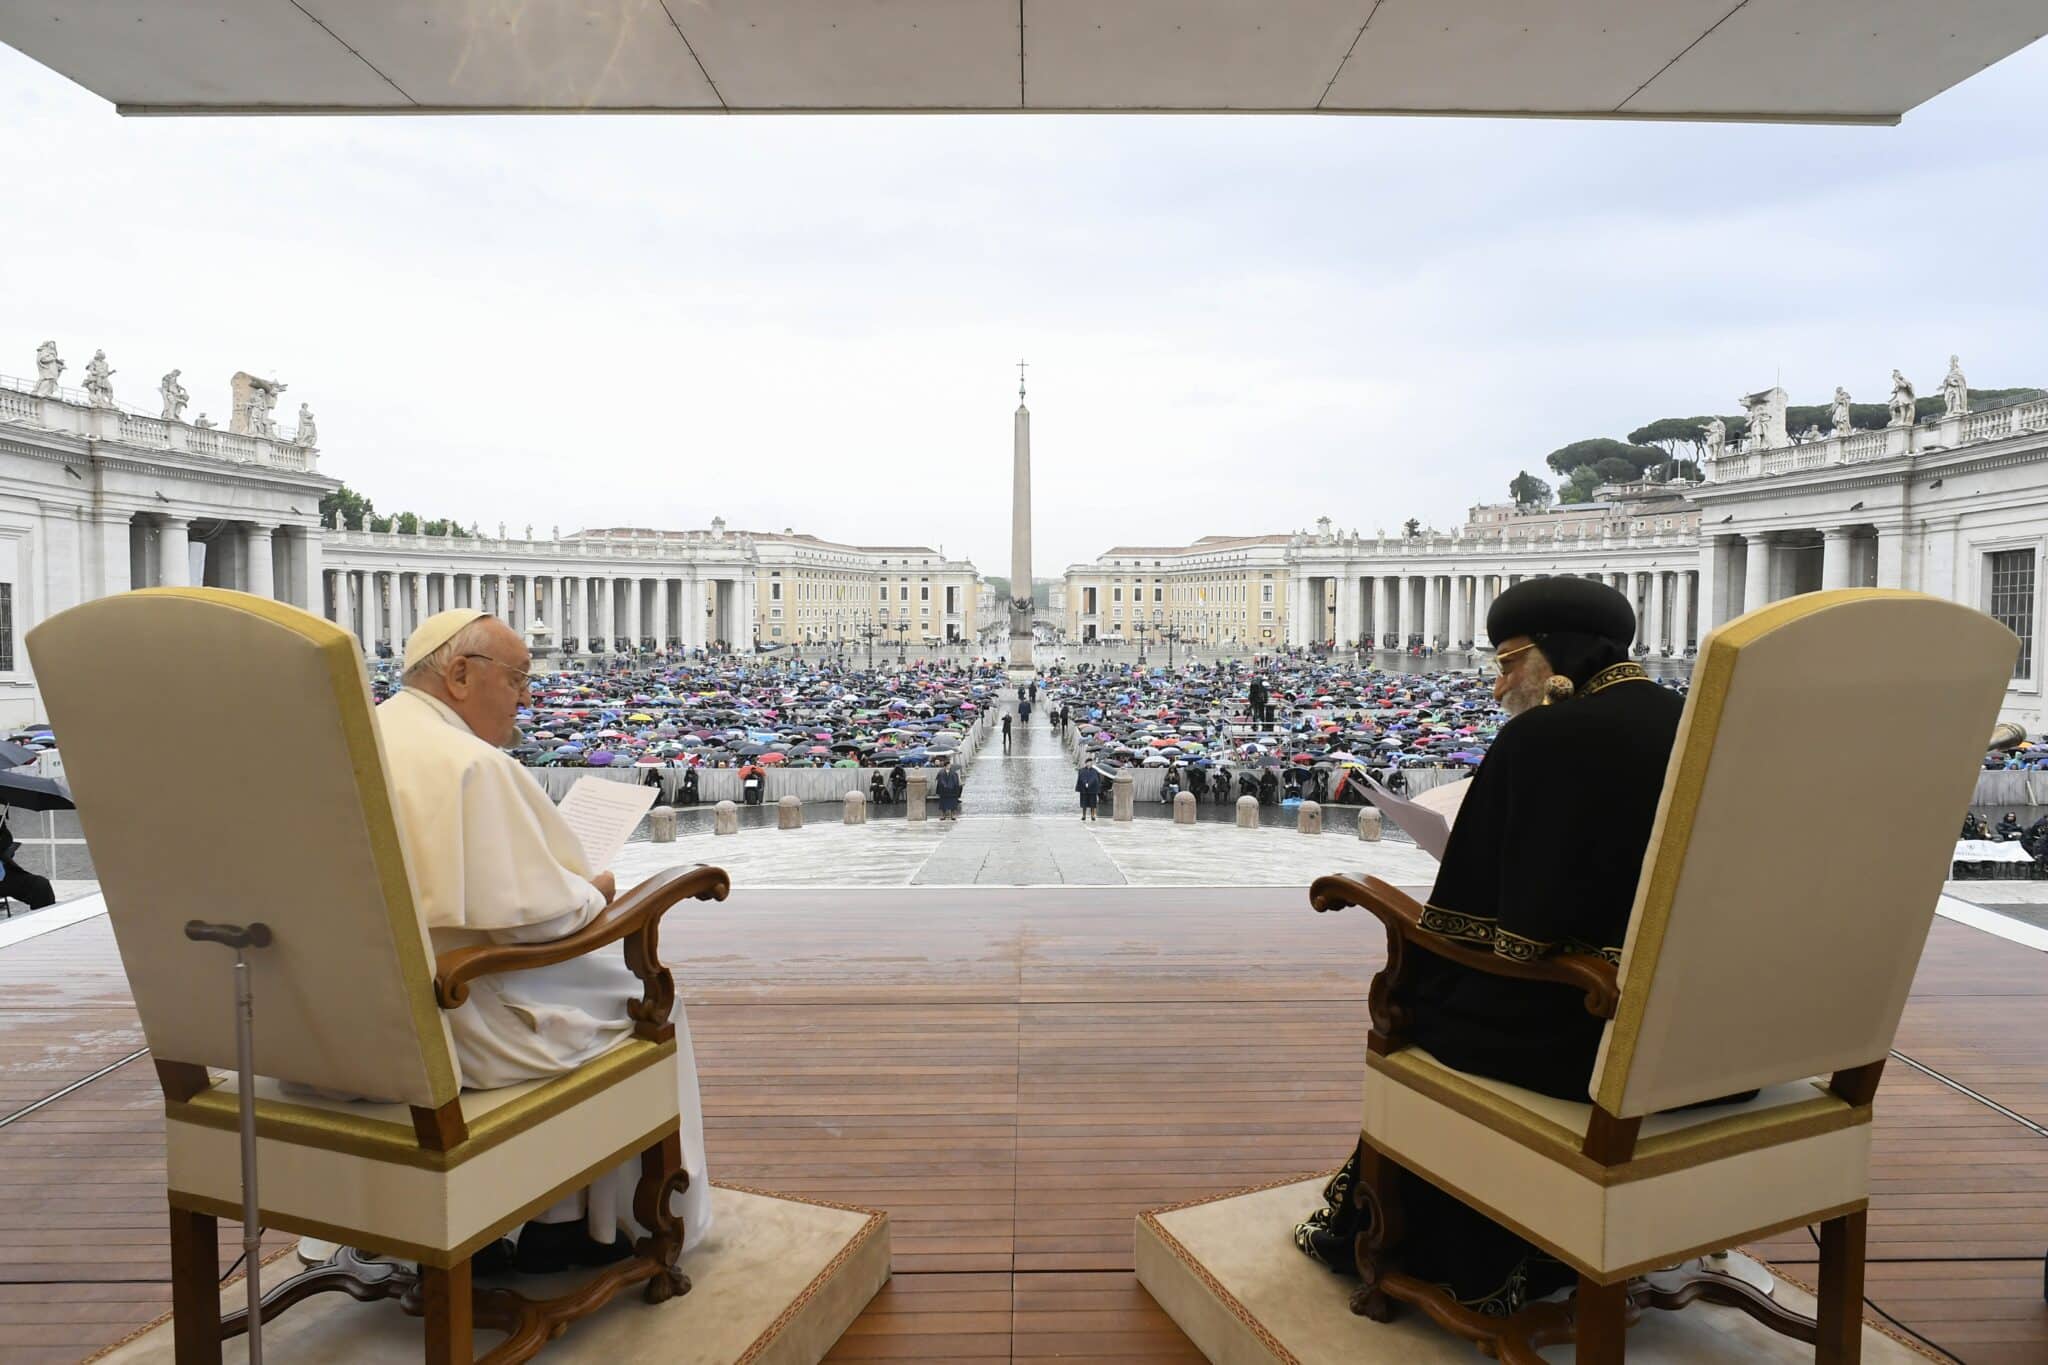 Pope Francis and Coptic Orthodox Pope Tawadros II publicly exchange greetings in St. Peter's Square at the Vatican May 10, 2023. Pope Tawadros was at the Vatican to commemorate the 50th anniversary of a joint declaration signed by the heads of the Catholic and Coptic Orthodox Churches. (CNS photo/Vatican Media)